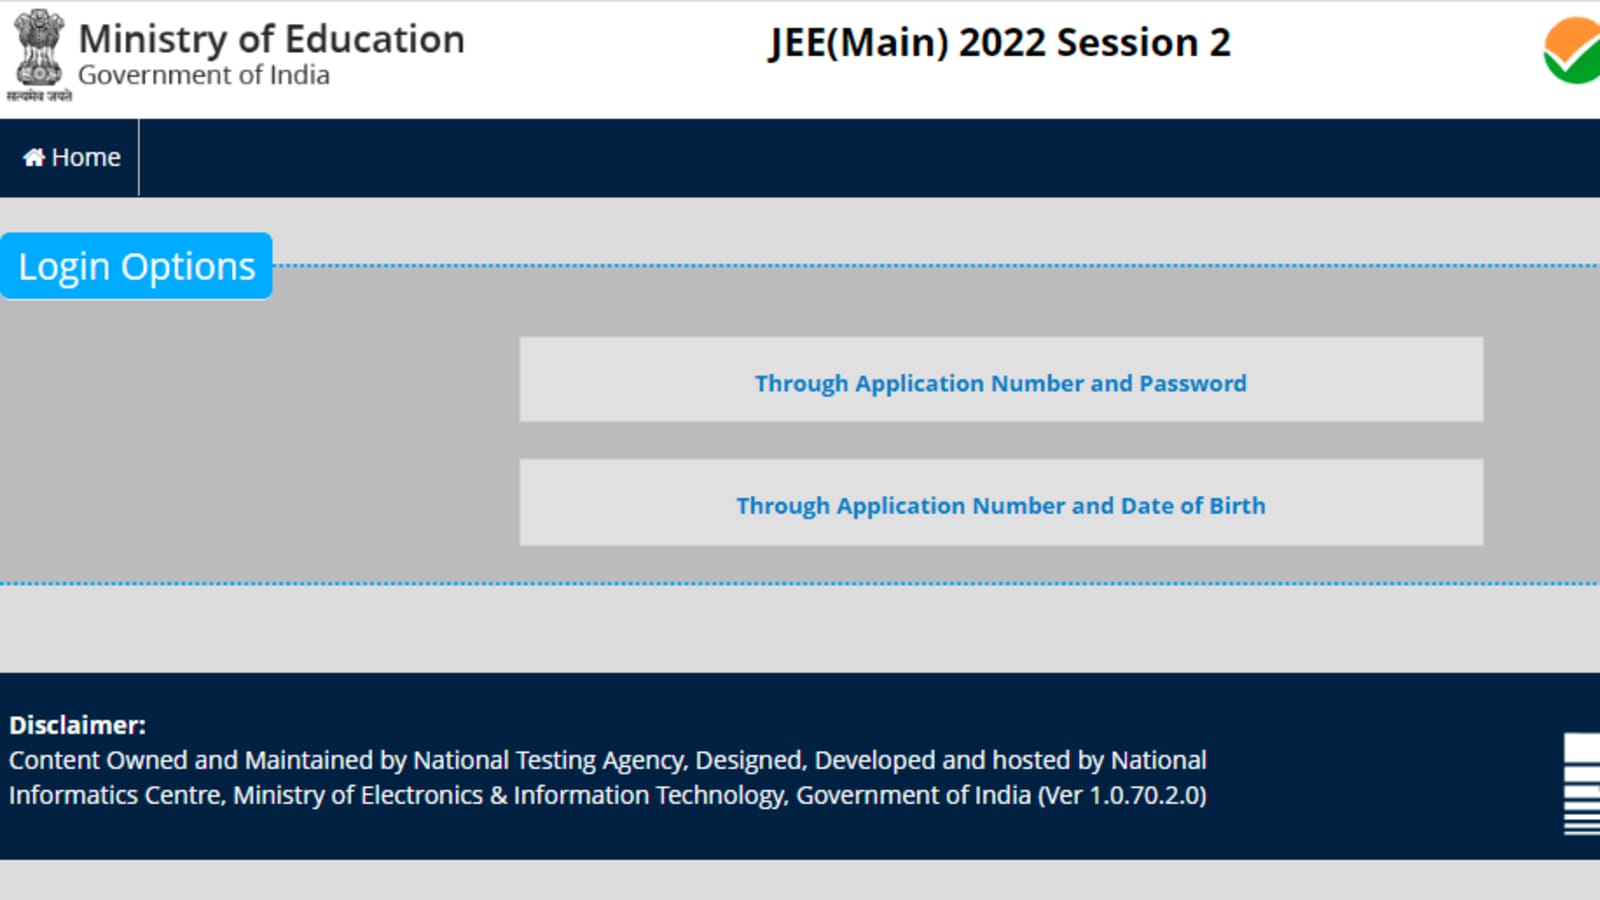 NTA releases JEE Main July session provisional answer keys, direct link here